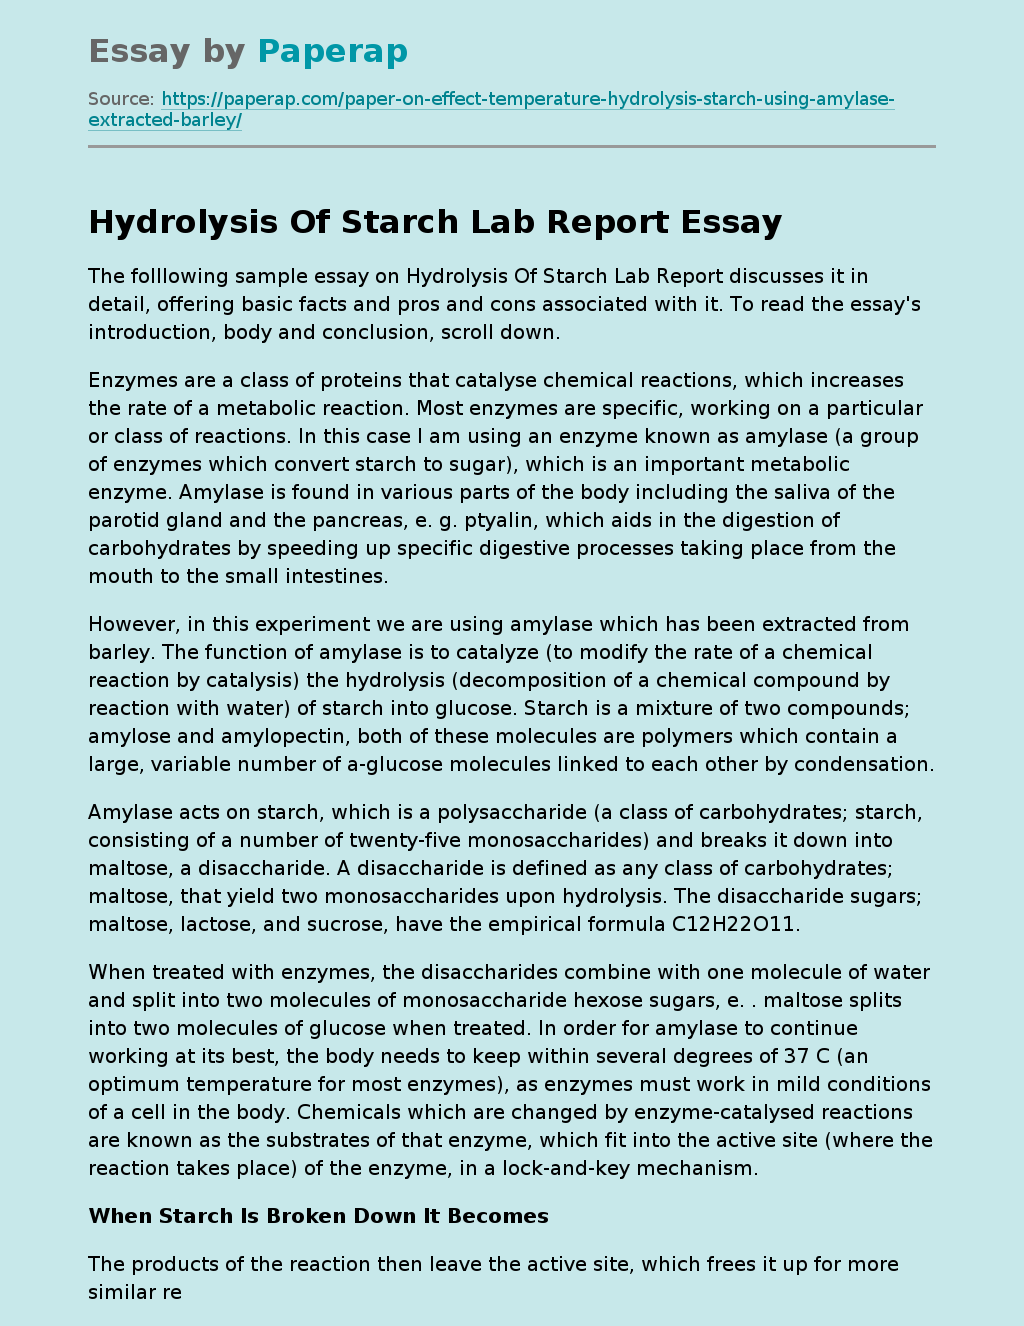 Hydrolysis Of Starch Lab Report